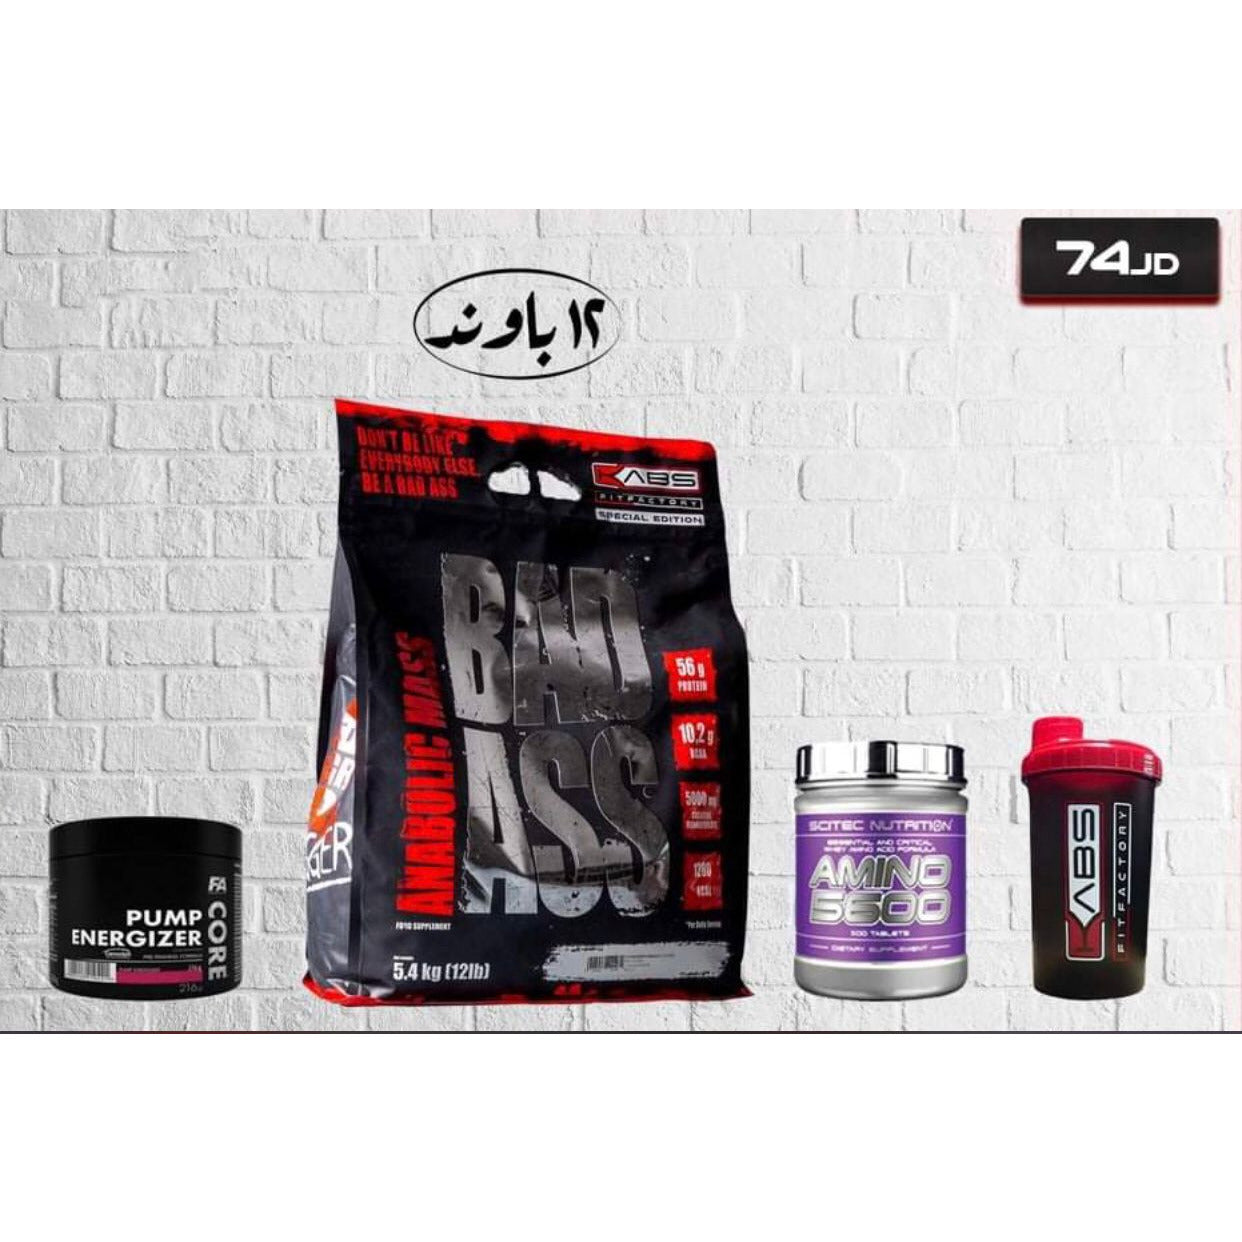 Kabs package increase weight, muscle mass, power the body and raise performance.